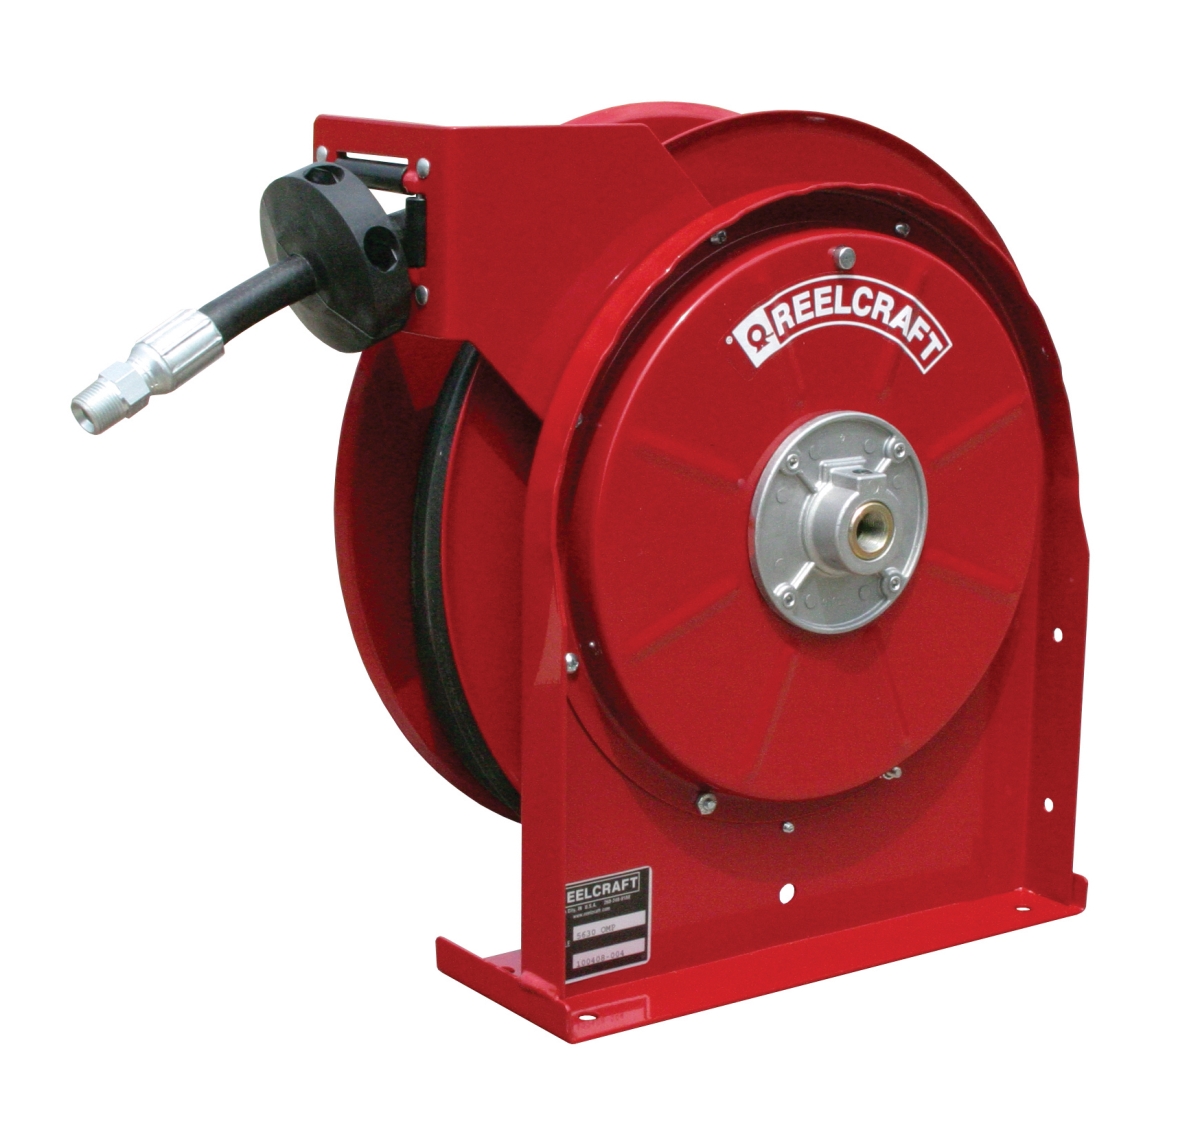 5630 Omp 0.375 In. X 30 Ft. Premium Duty 2600 Psi Oil With Hose Reel, Red